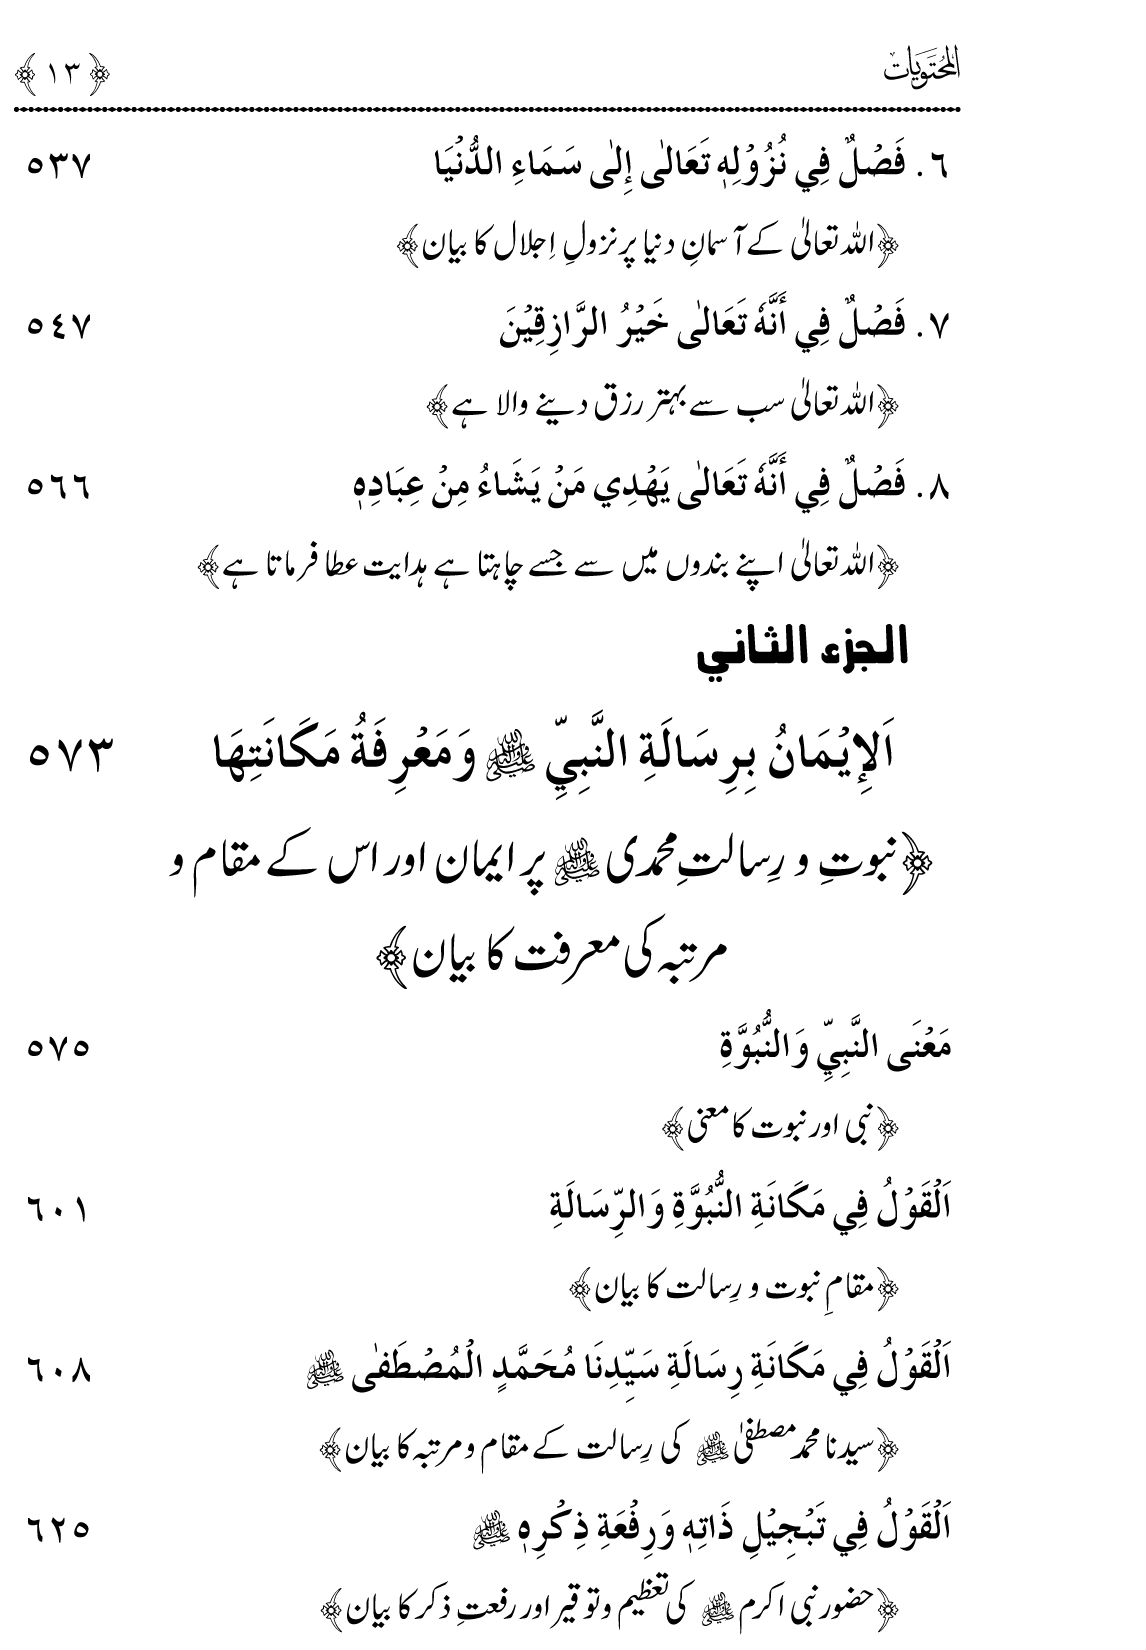 Ladders of Sunna for Deliverance from Deviation and Tribulations (Vol. 3)